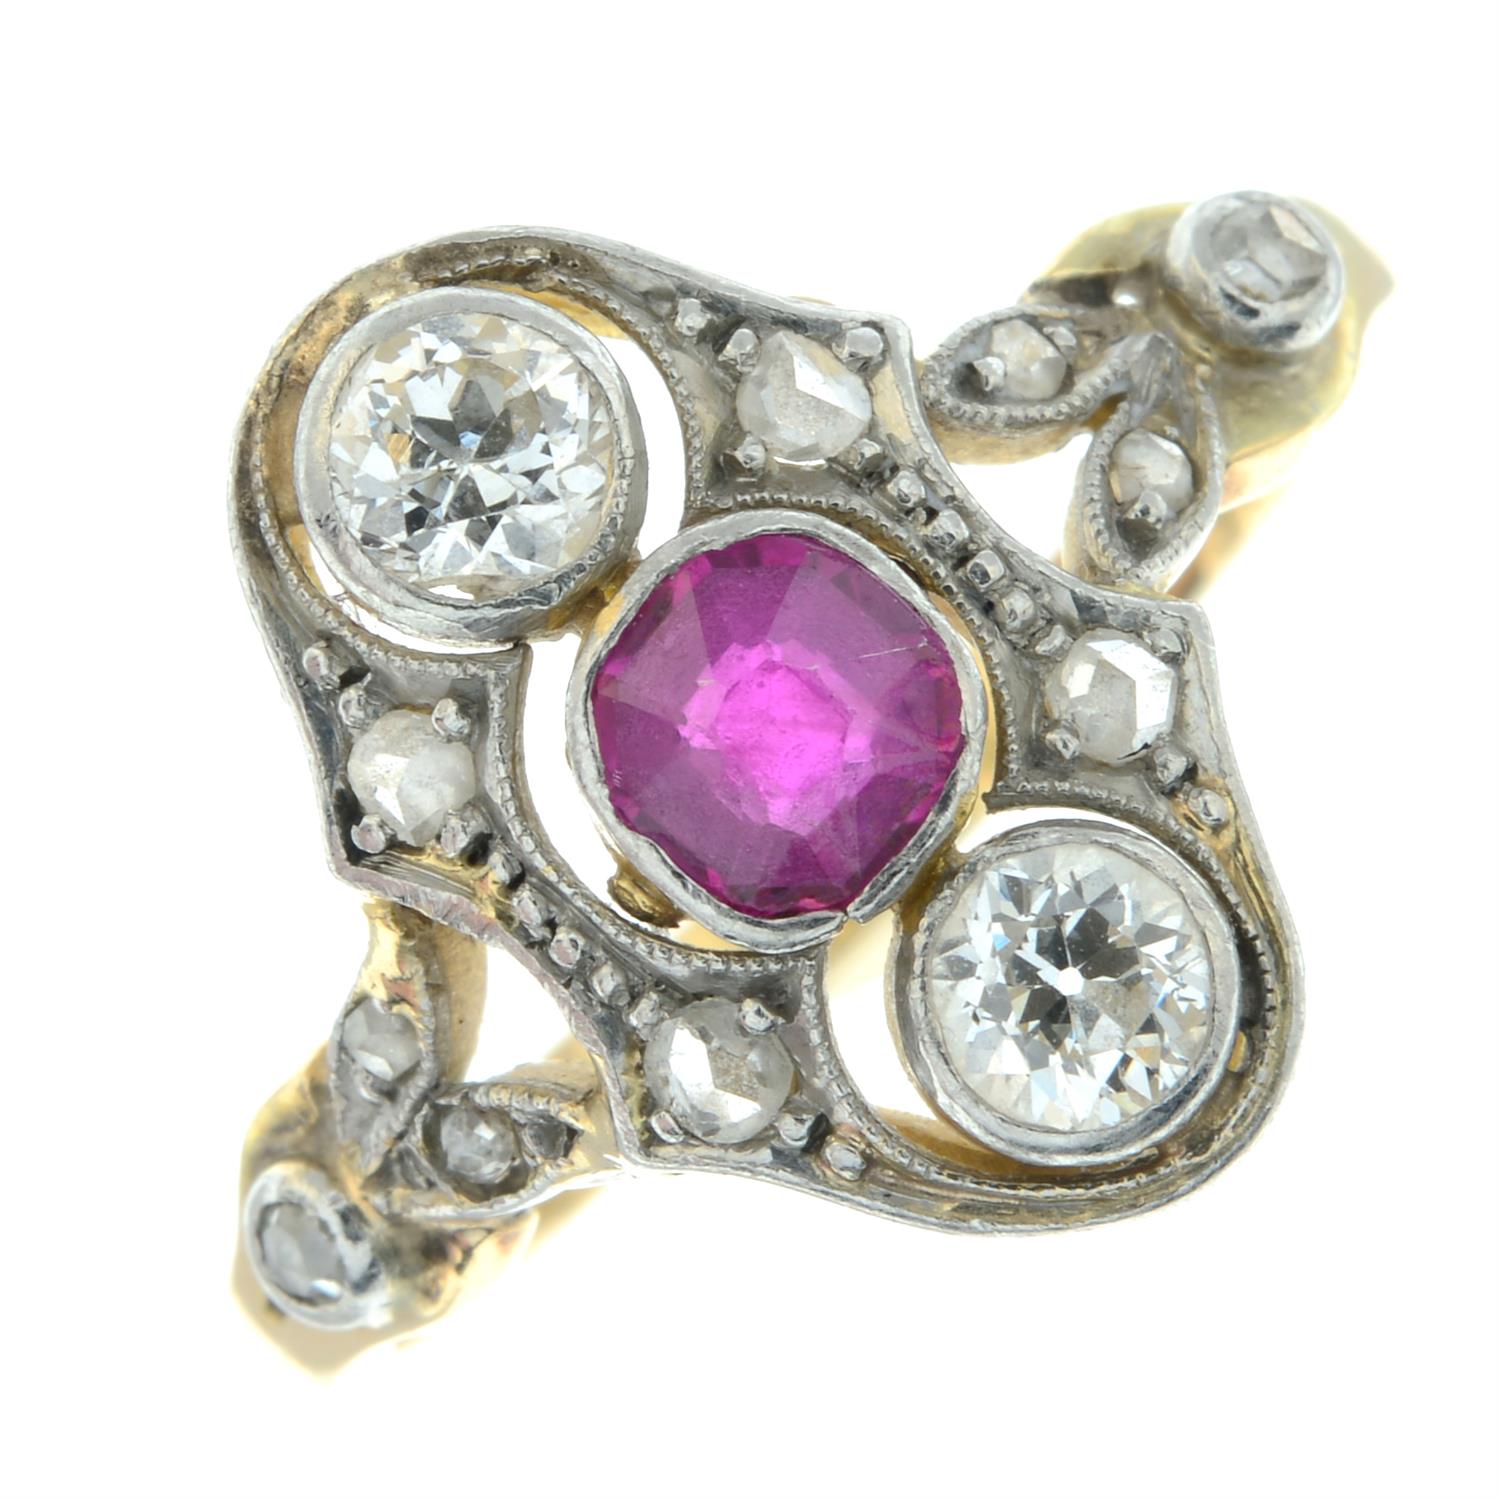 An early 20th century platinum and gold Burmese ruby, old-cut diamond and diamond point ring. - Image 2 of 6